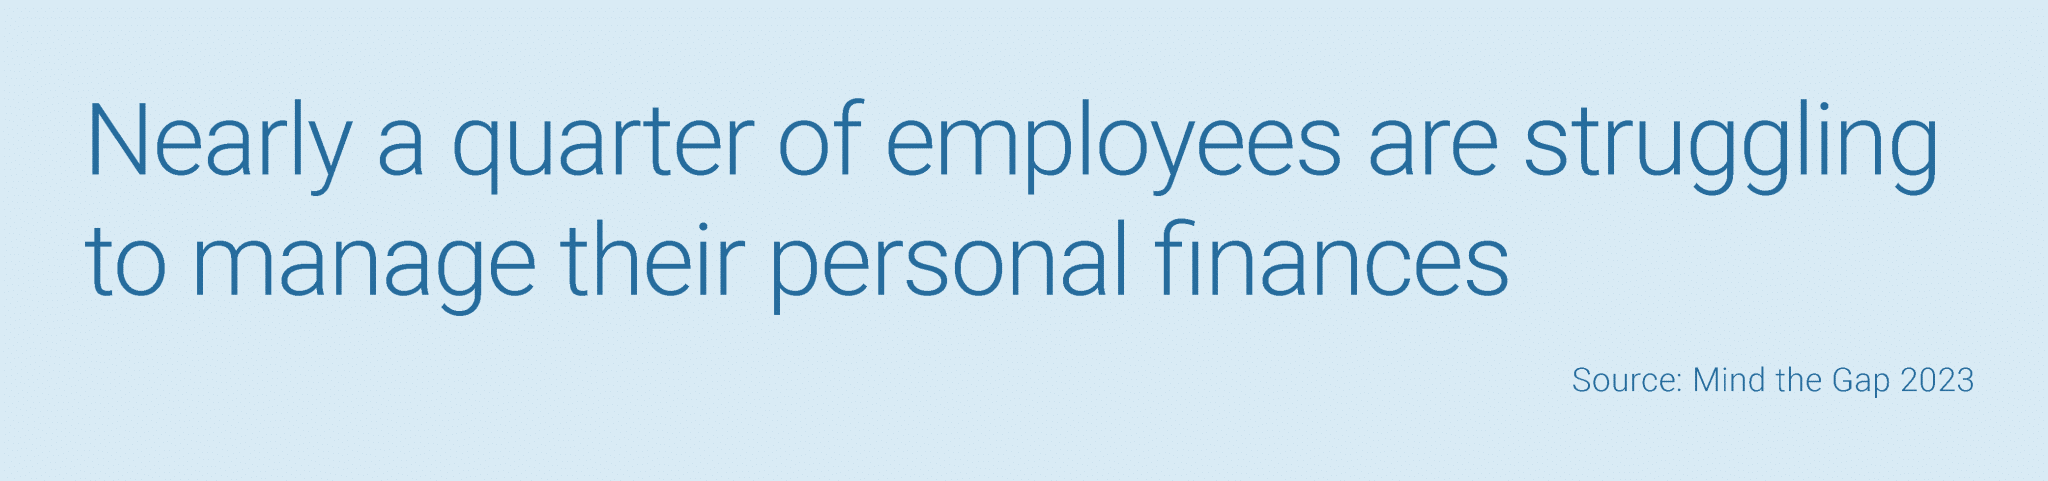 Nearly a quarter of employees are struggling to manage their personal finances